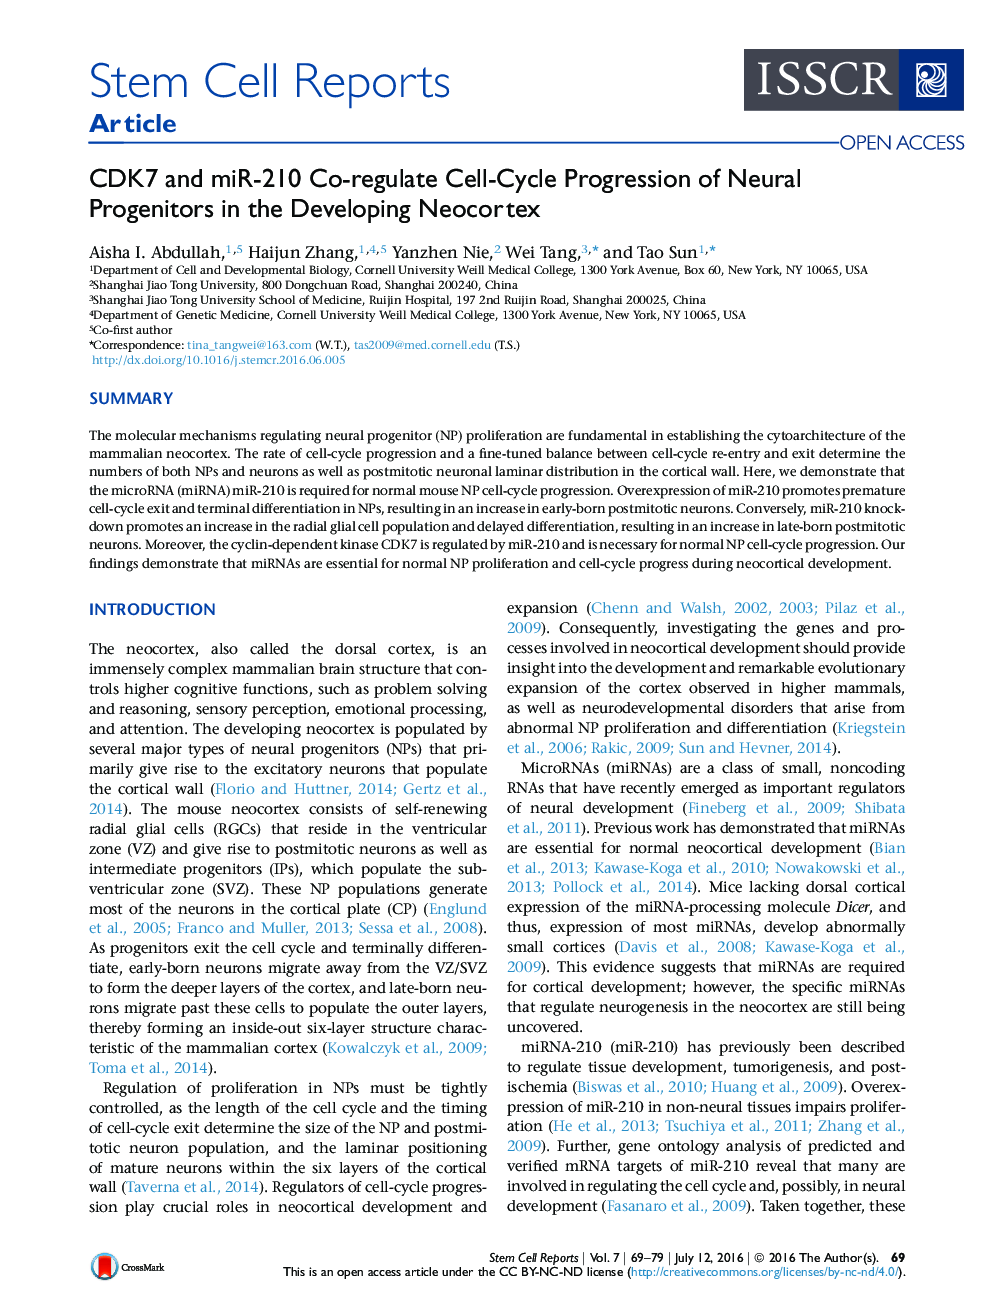 CDK7 and miR-210 Co-regulate Cell-Cycle Progression of Neural Progenitors in the Developing Neocortex